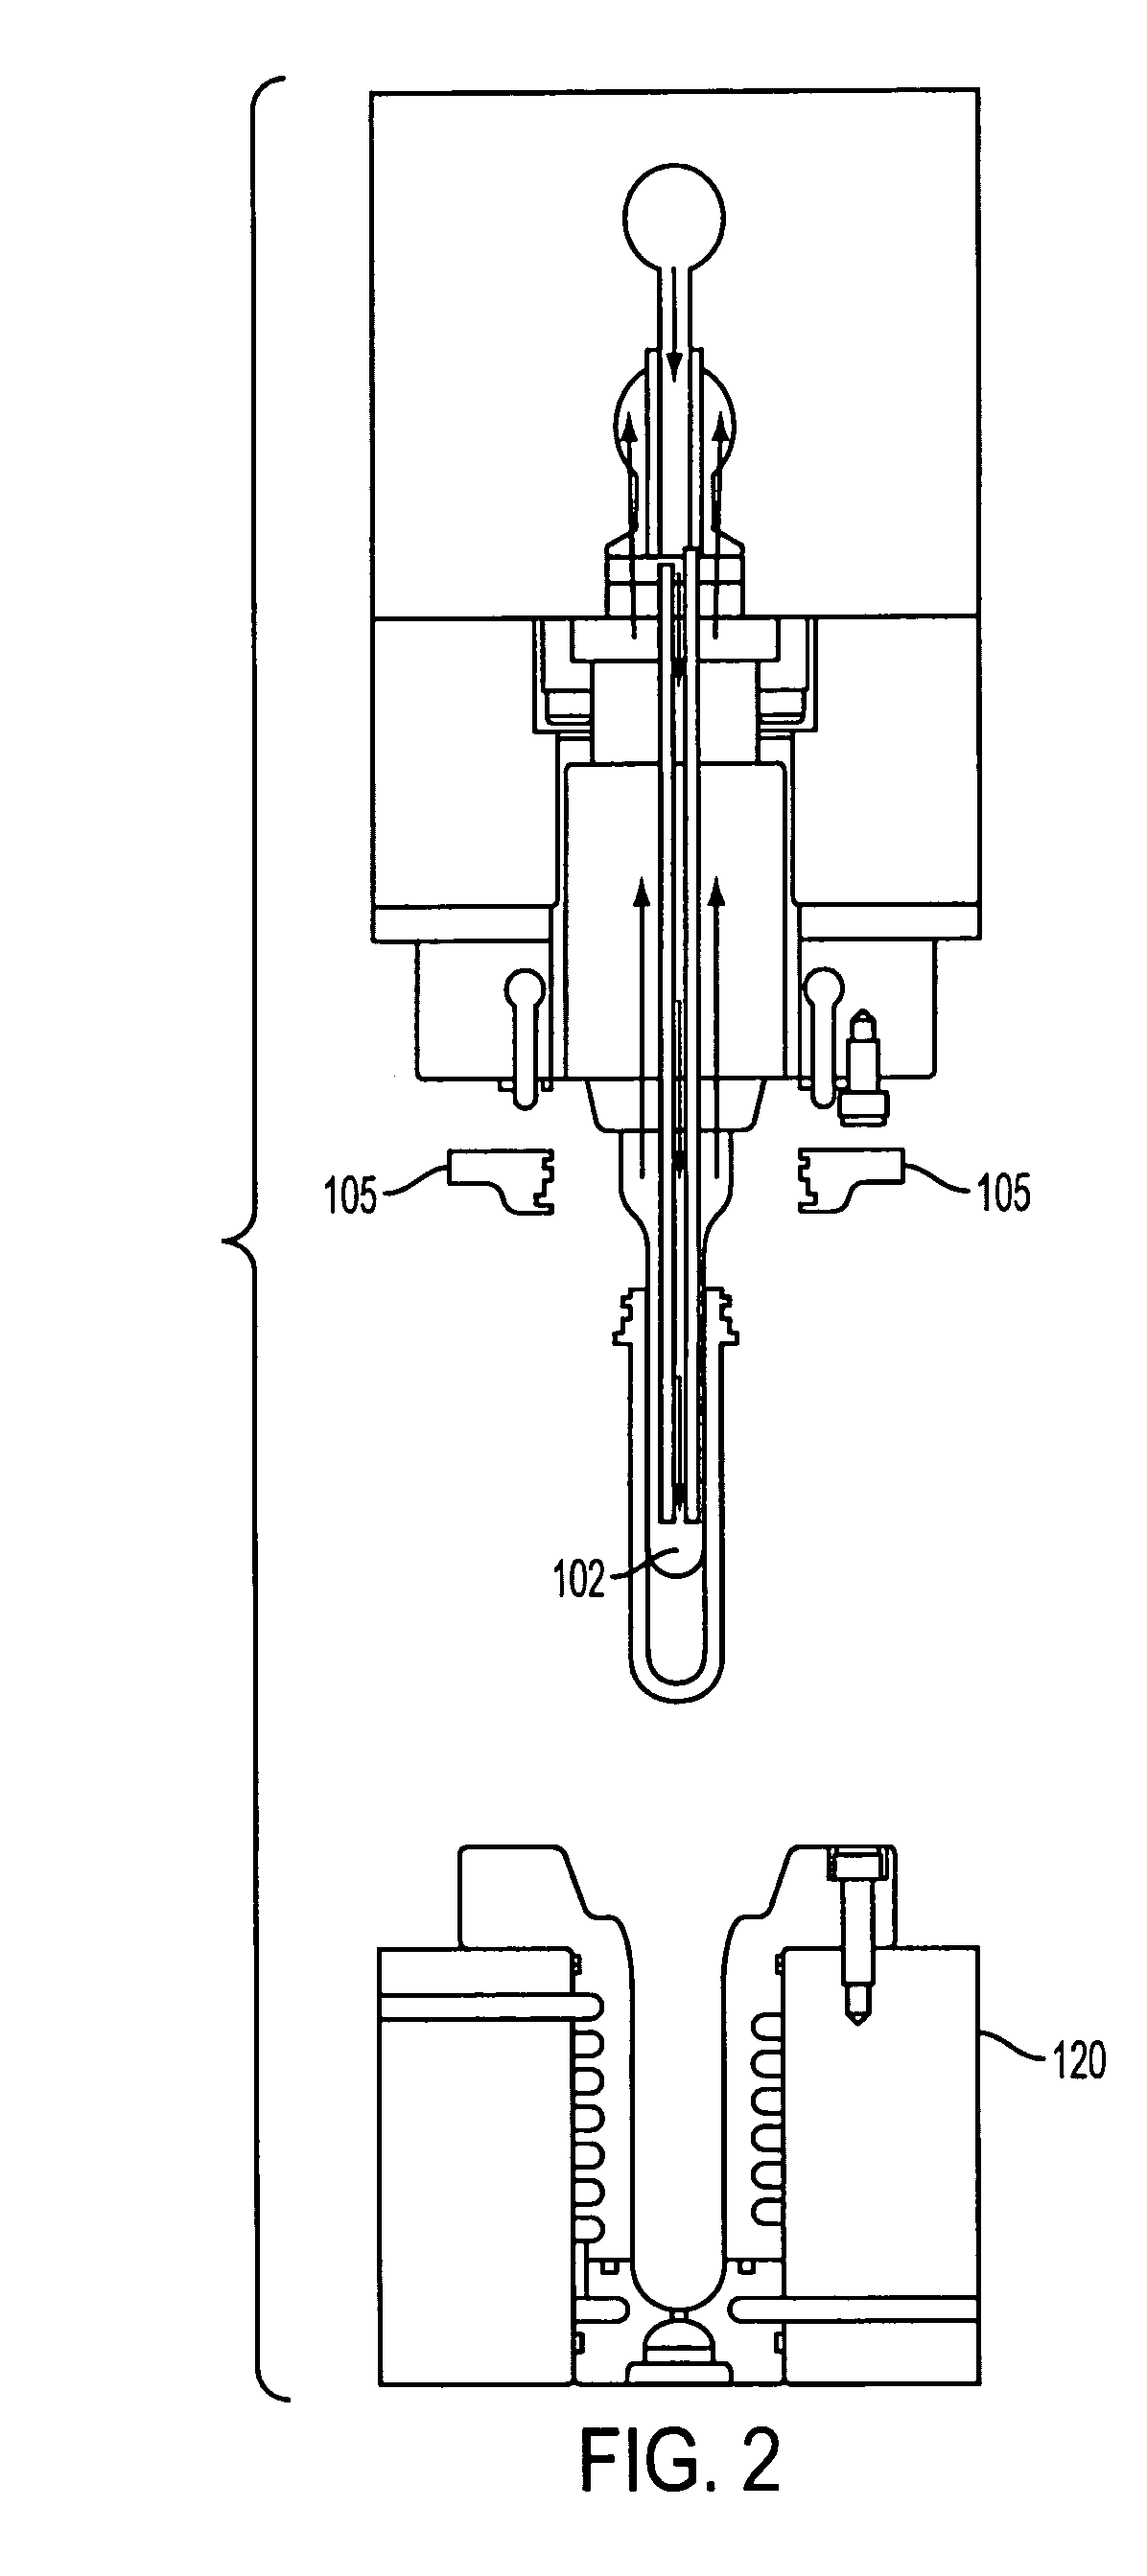 Device and method for removal of preforms